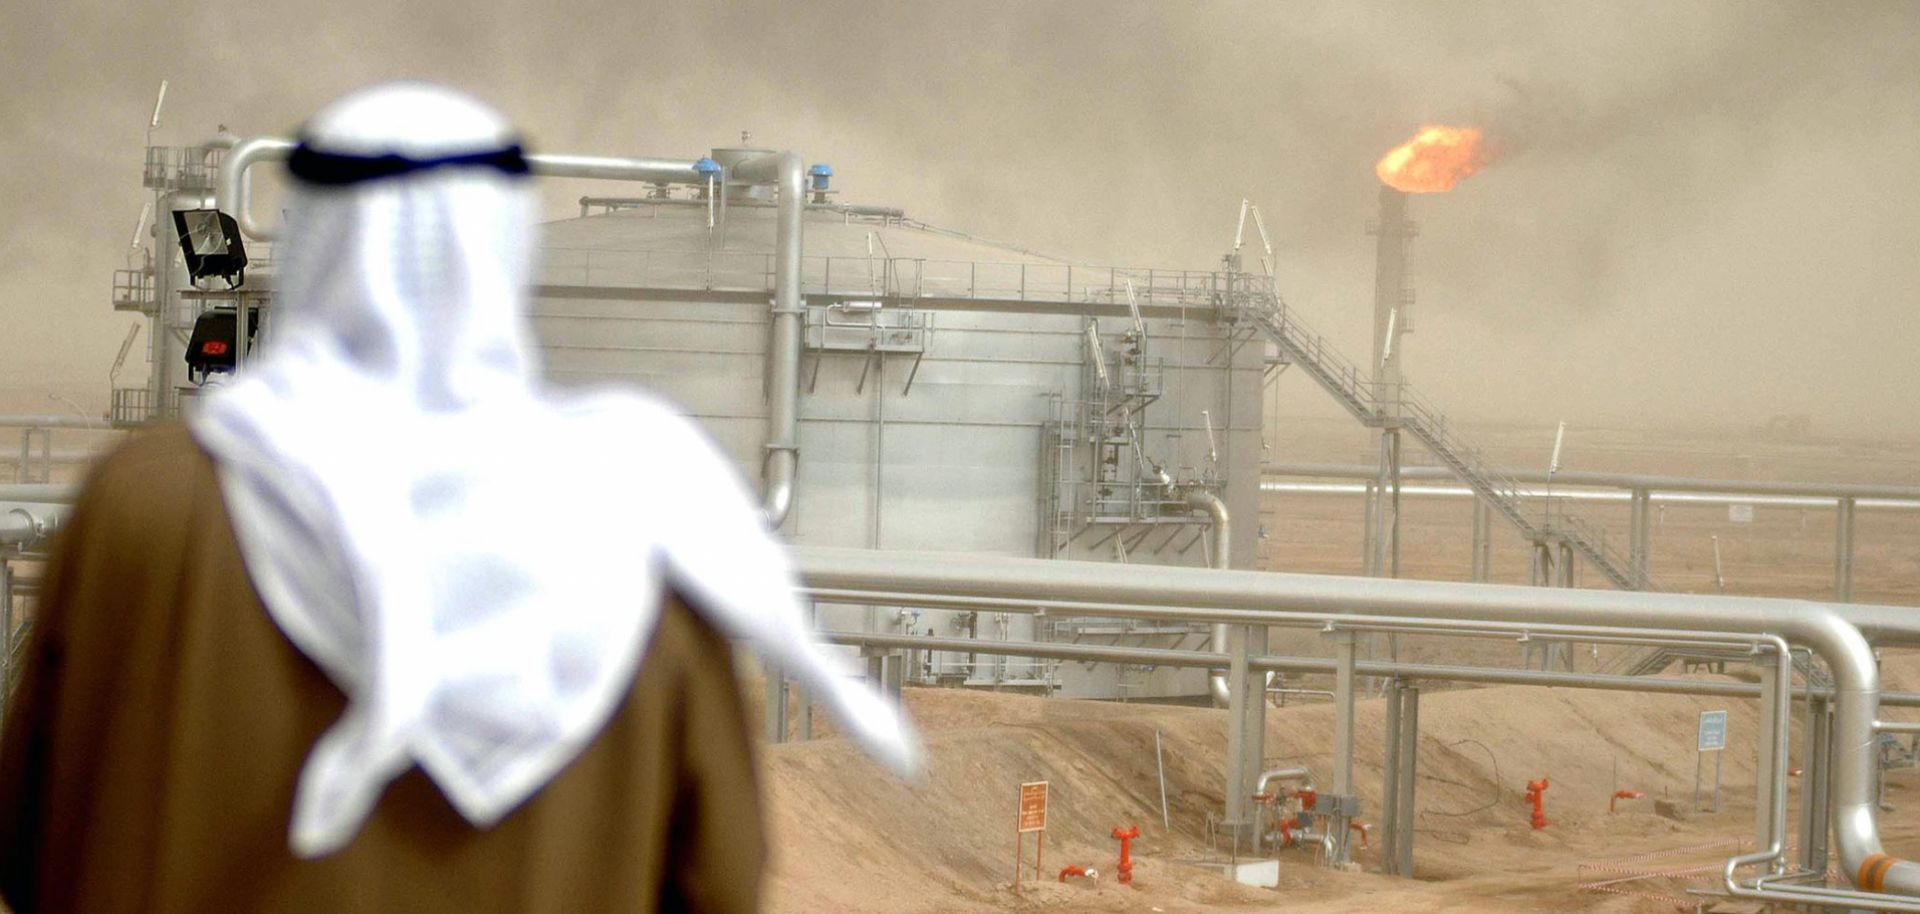 In this January 2005 file image, a Kuwait Oil Company employee looks at a newly opened oil-gathering center north of Kuwait City.